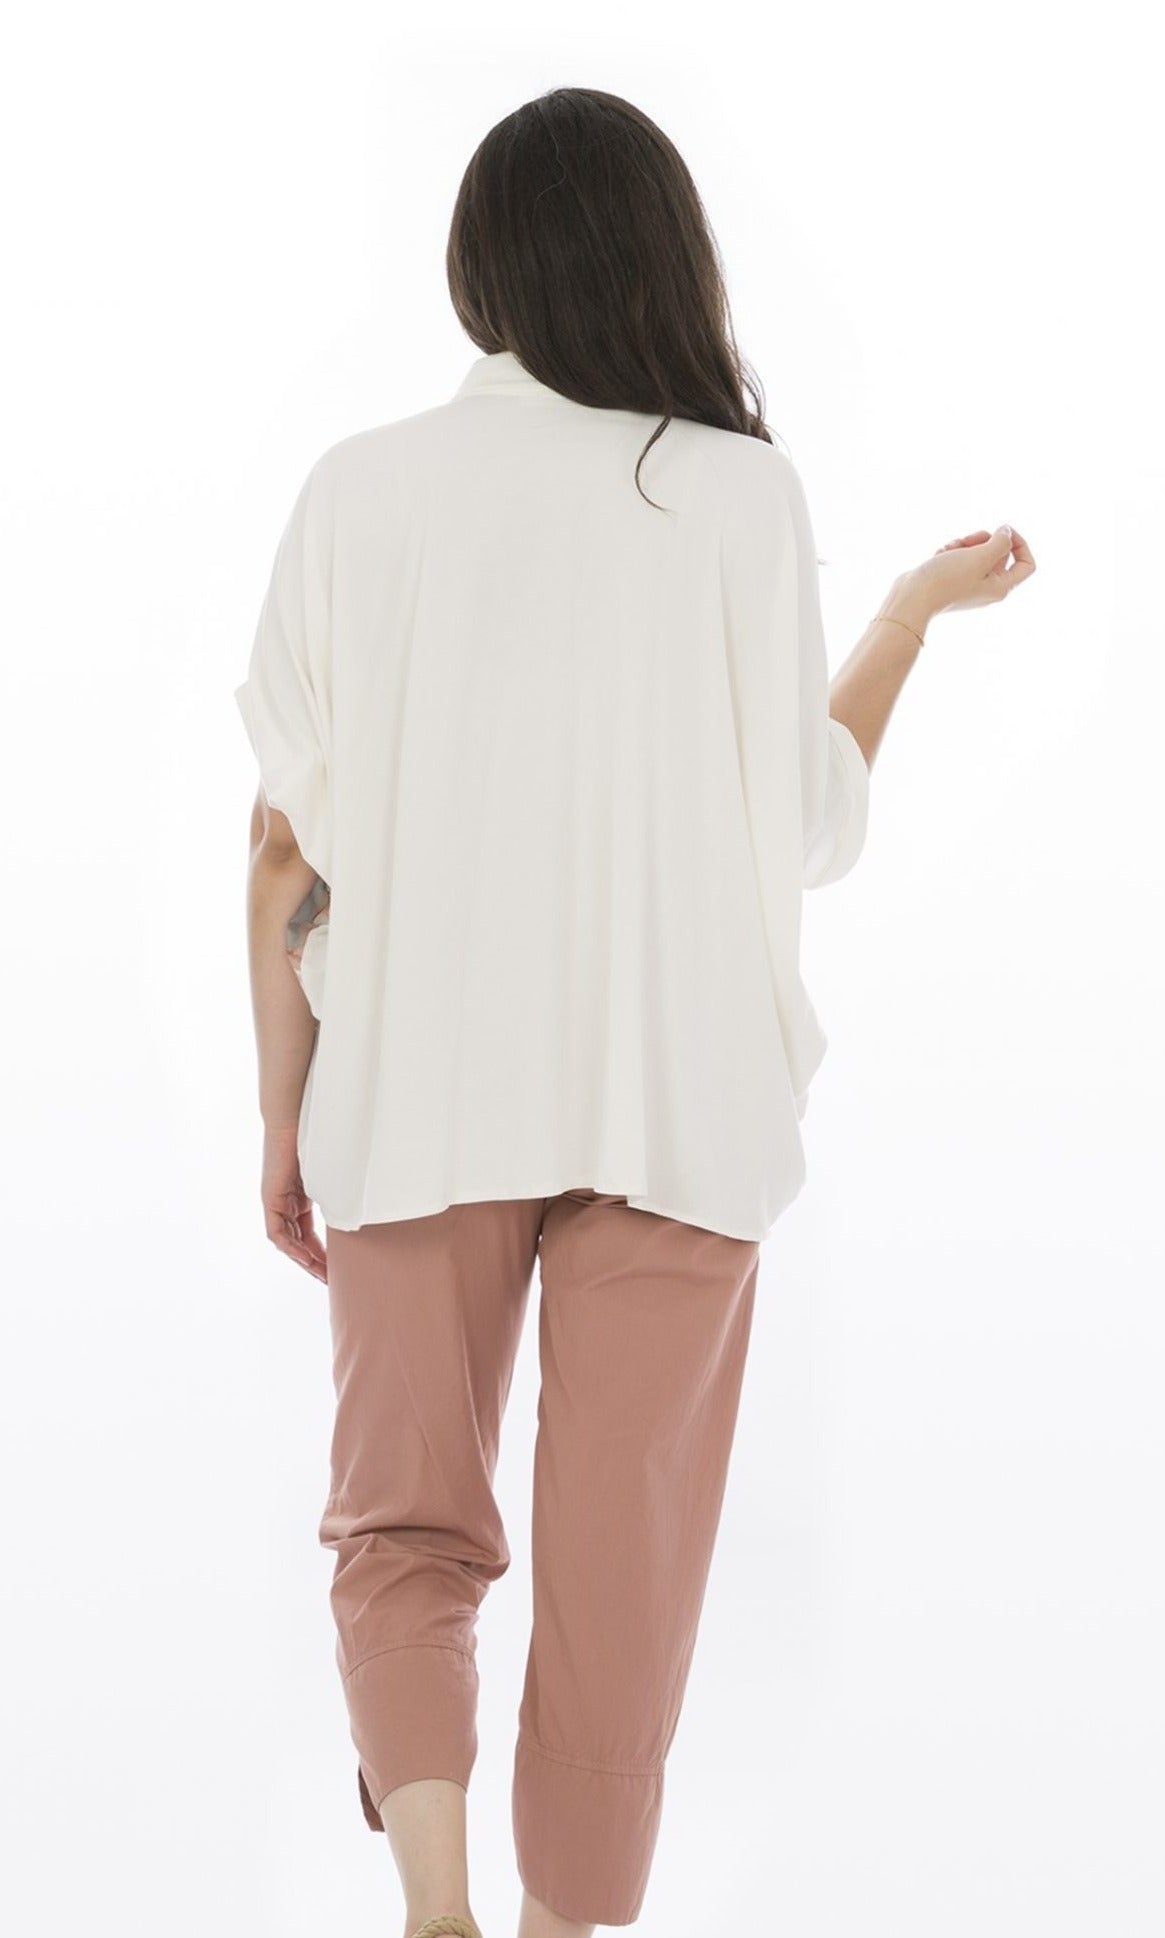 Back, top half view of a woman wearing pink capris and the Luukaa Watercolor Shirt. The back of this shirt is completely white and oversized. The sleeves are short and dolman-like.